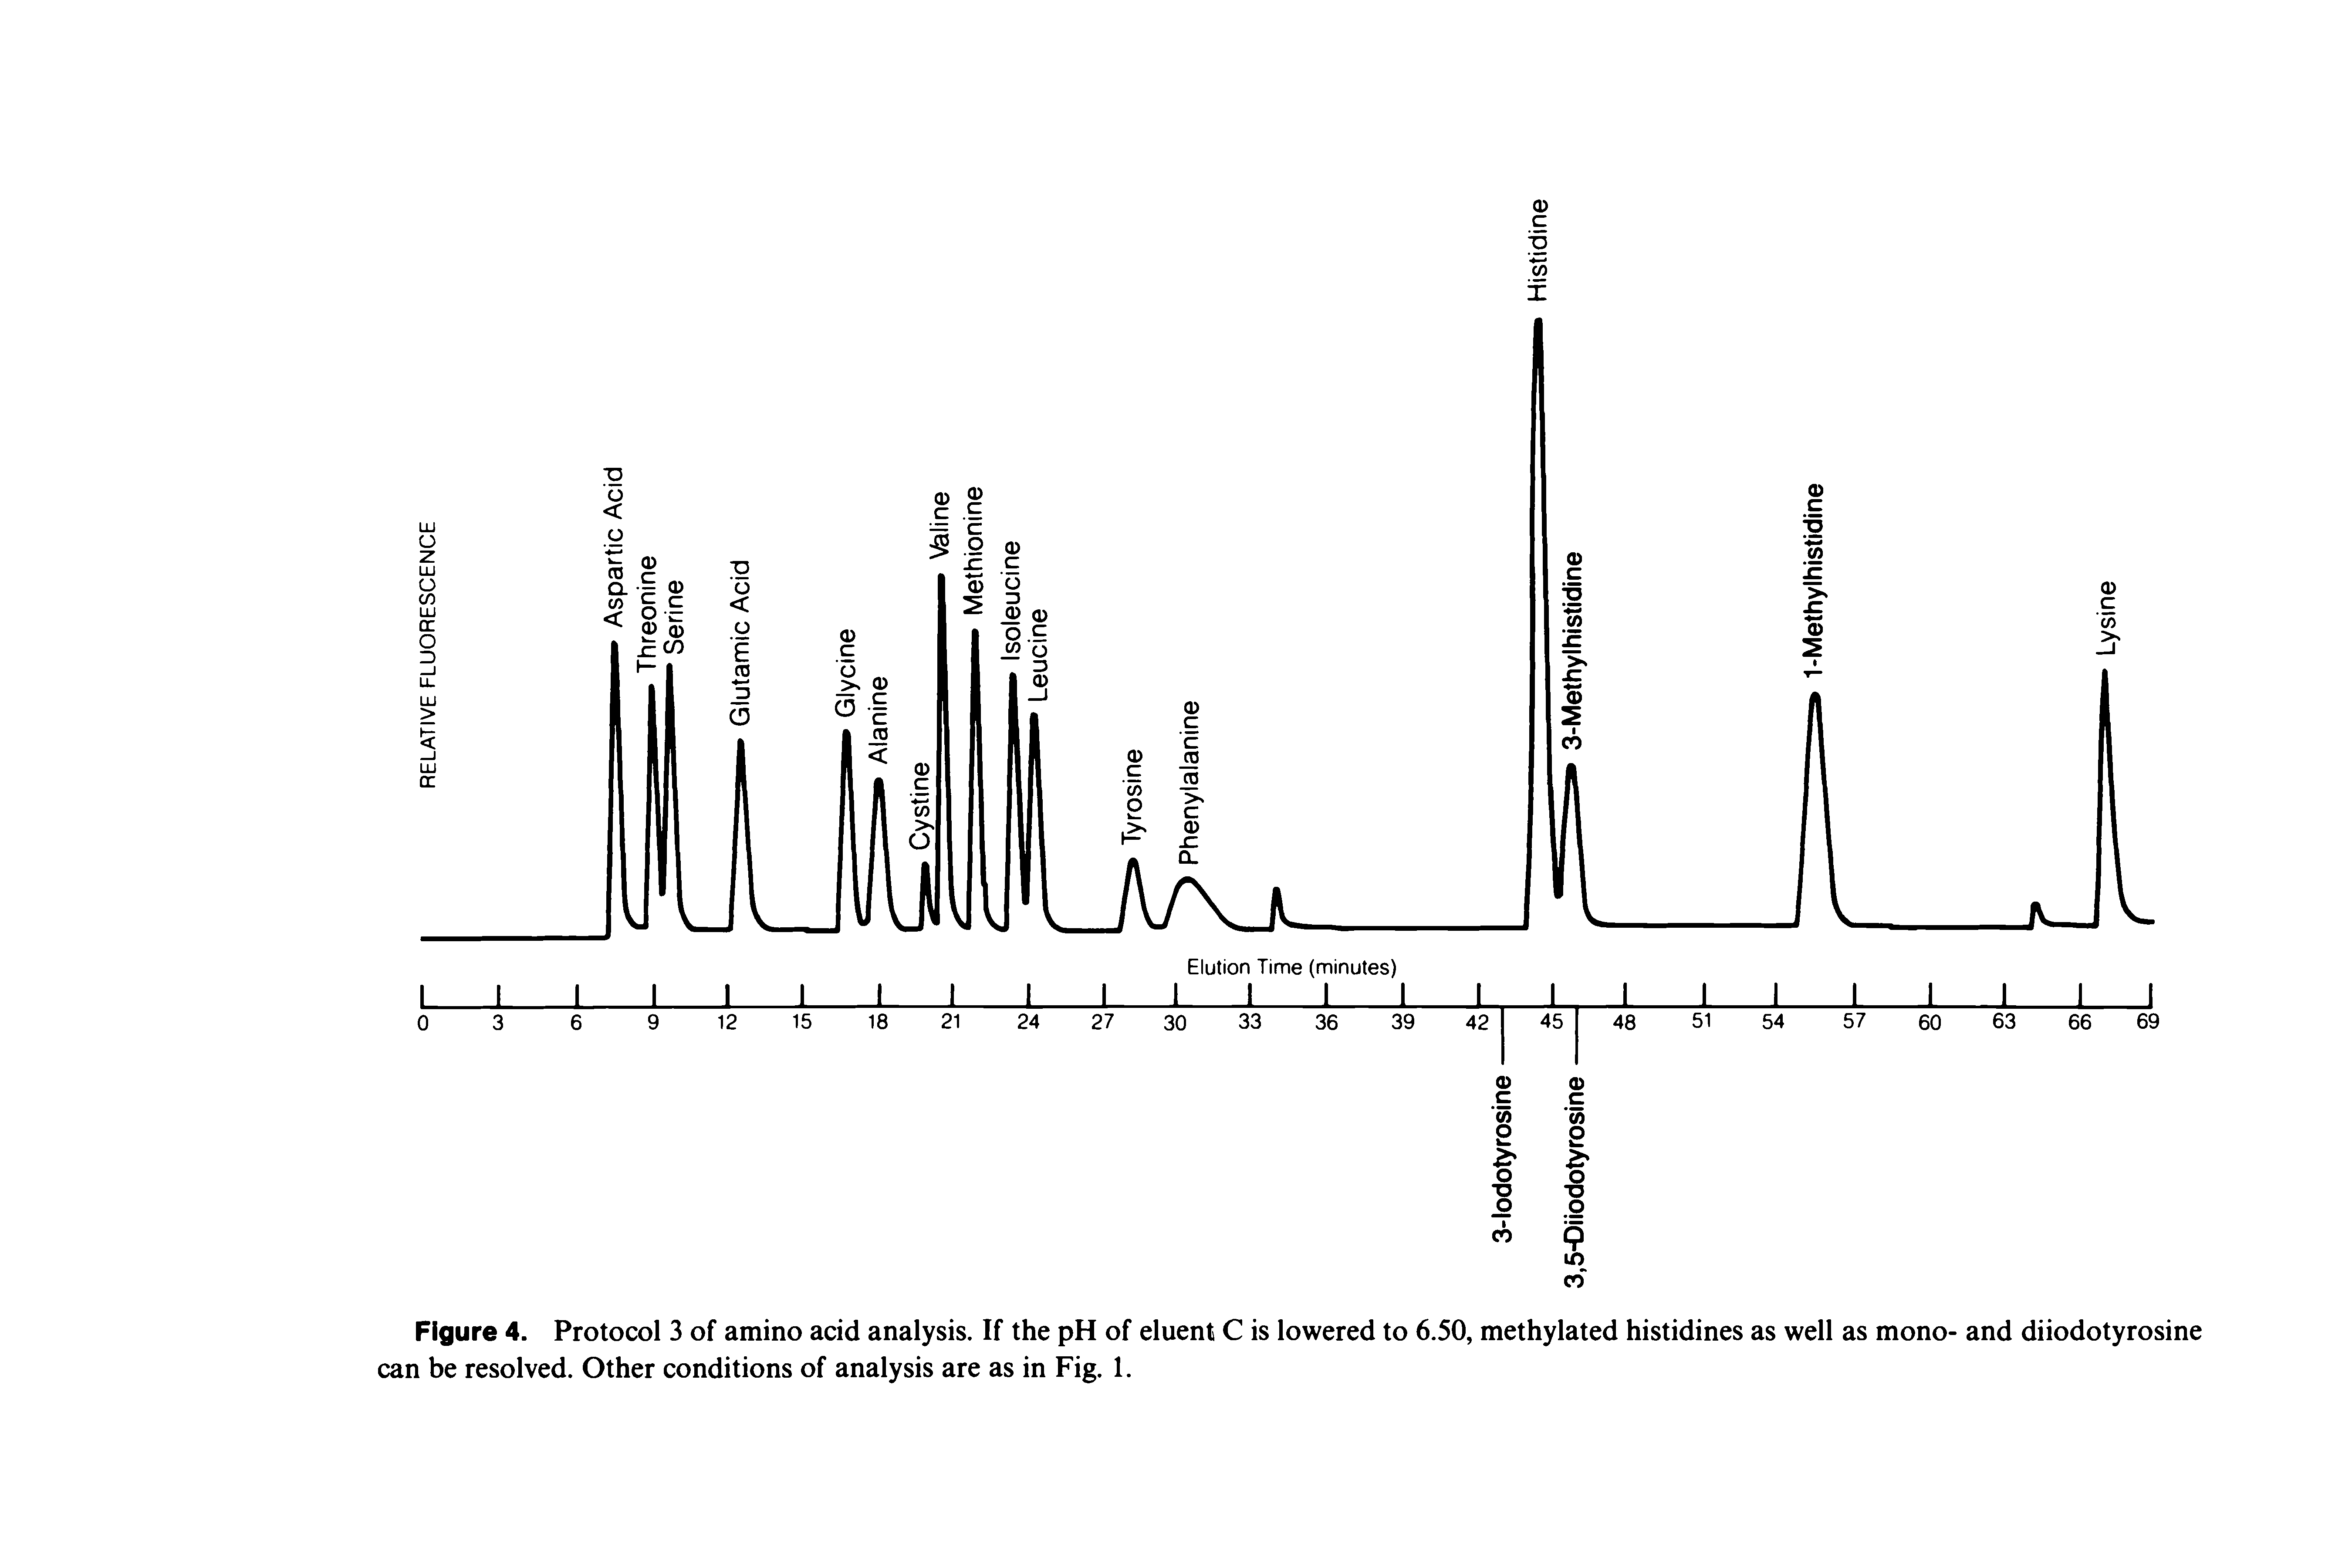 Figure 4. Protocol 3 of amino acid analysis. If the pH of eluent C is lowered to 6.50, methylated histidines as well as mono- and diiodotyrosine can be resolved. Other conditions of analysis are as in Fig. 1.